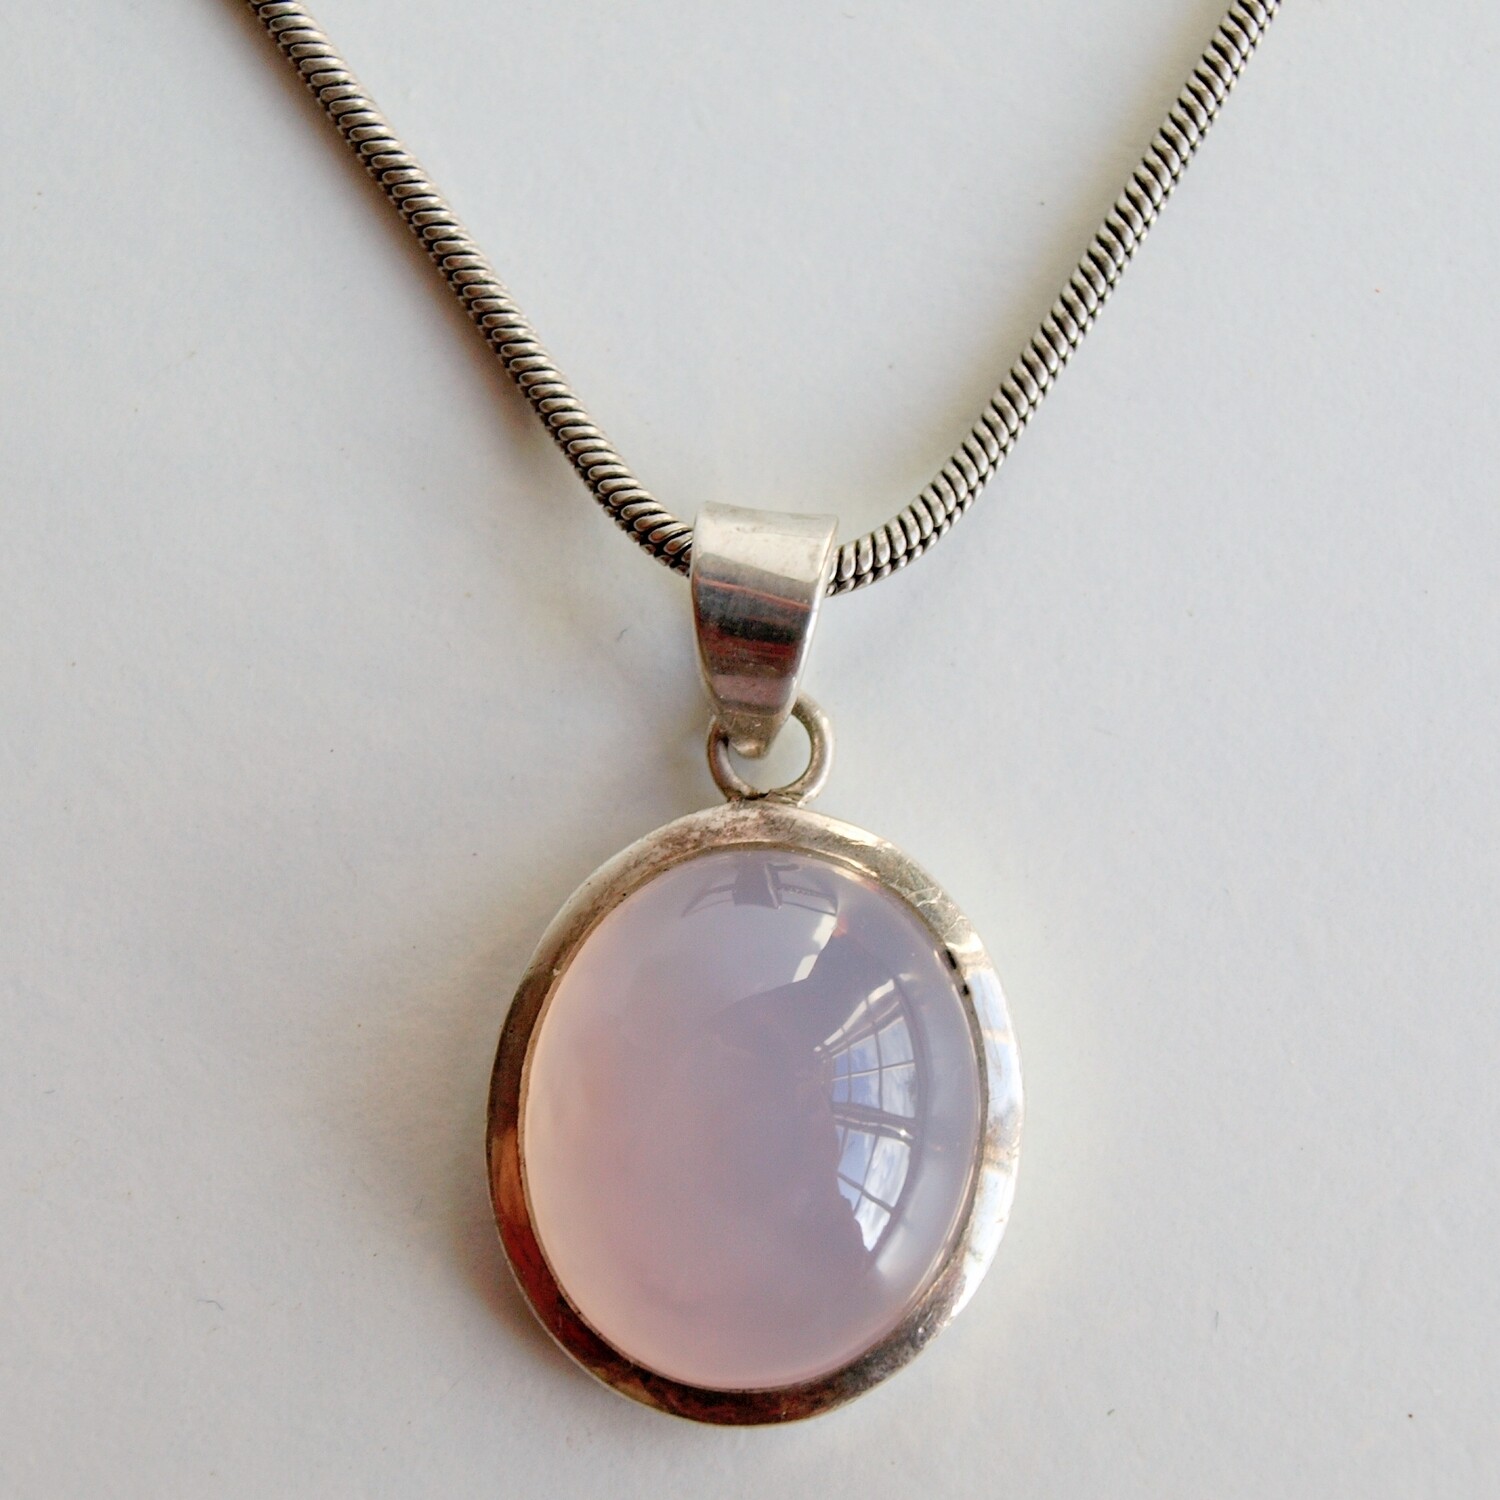 Ladies Solid Silver Snake Chain Necklace + Pink Gemstone Pendant